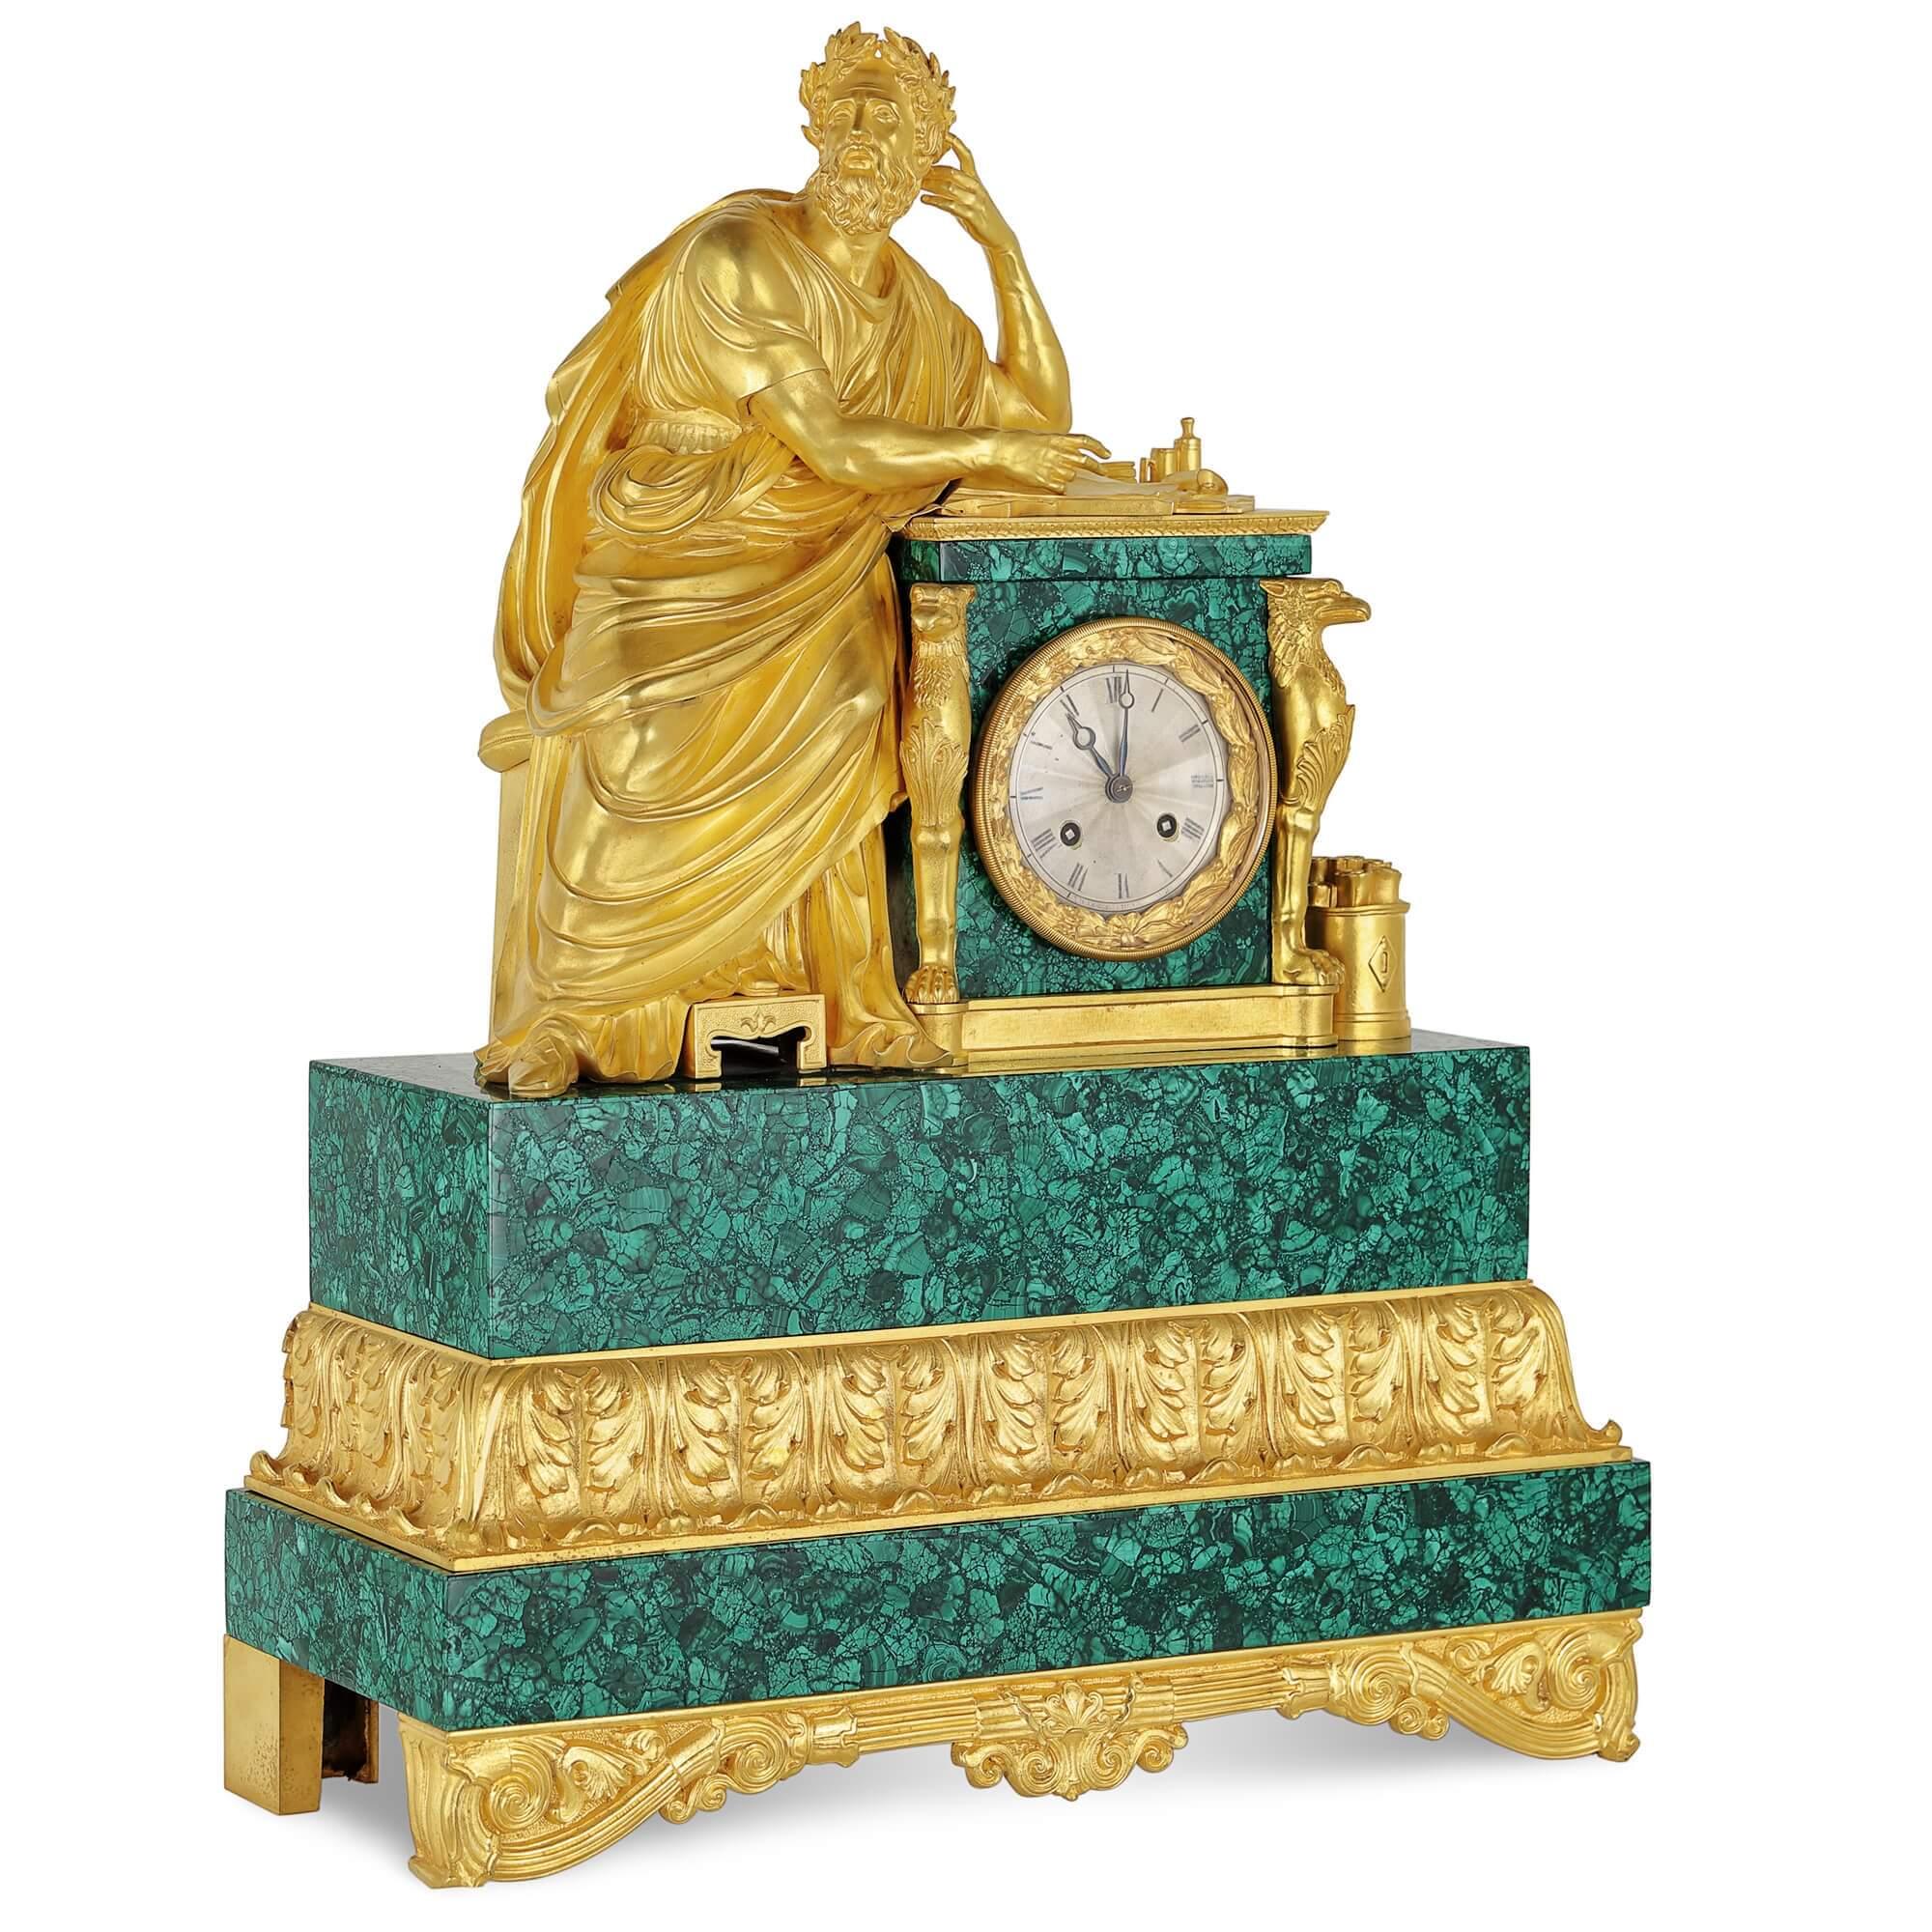 Neoclassical style gilt bronze and malachite mantel clock
French, 19th century
Height 58cm, width 43cm, depth 17cm

This fine mantel clock is crafted from gilt bronze and malachite (with the malachite veneer being a later addition) in the